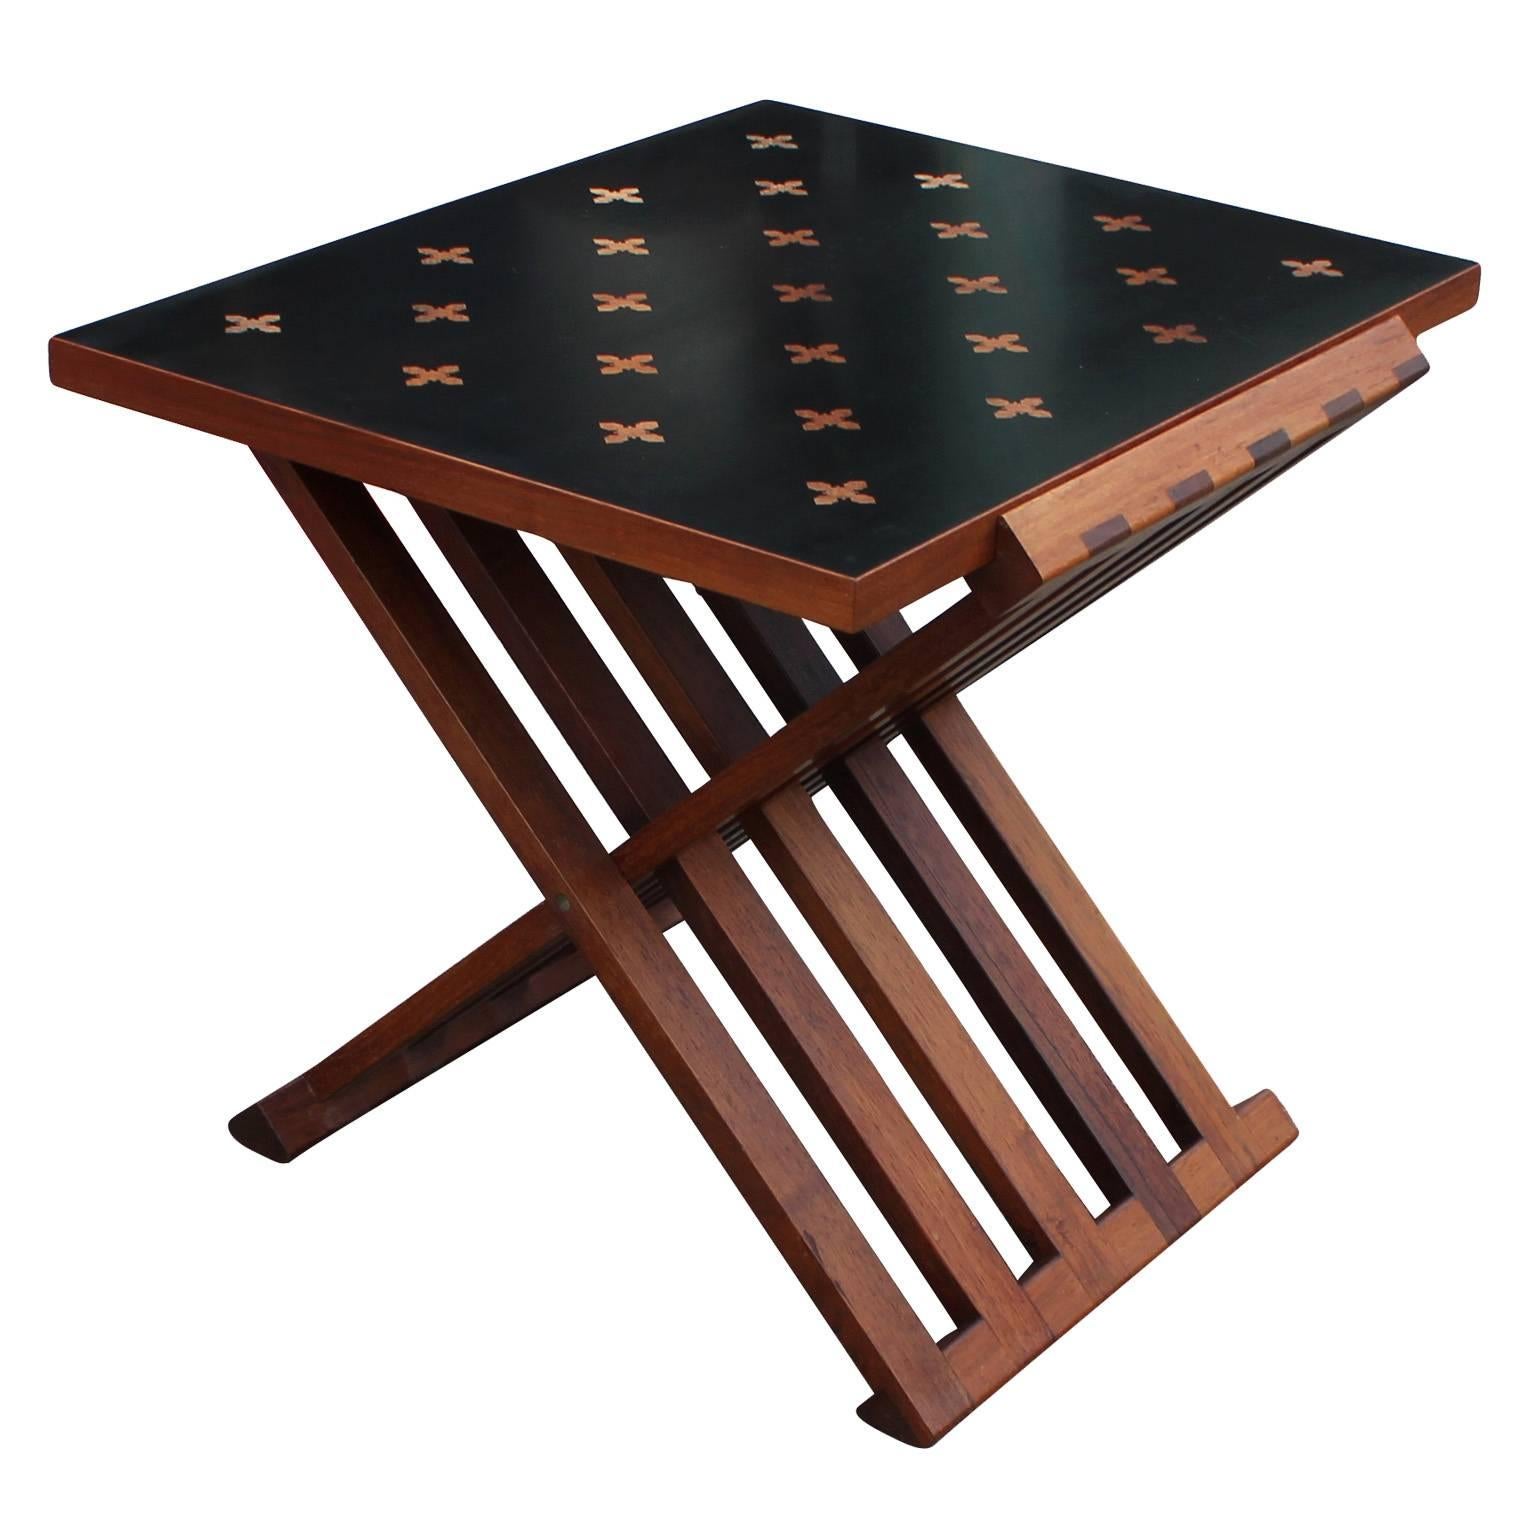 Parquetry occasional table, model 5425, designed by Edward Wormley for Dunbar. Folding rosewood base holds the mahogany-edged top with bleached mahogany parquetry. Inquire for matching cube side table.